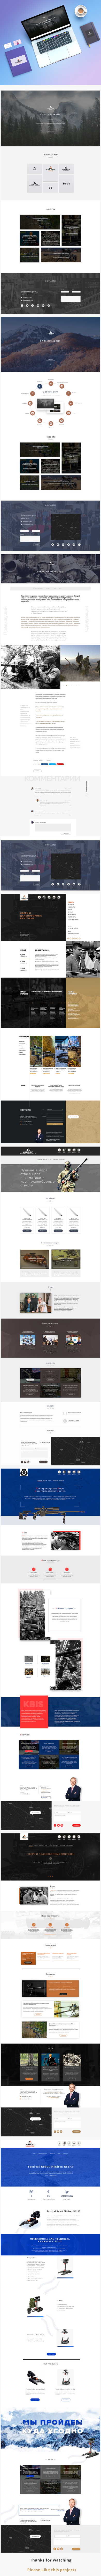 Lobaev weapon websites redesign concepts Weapon creative